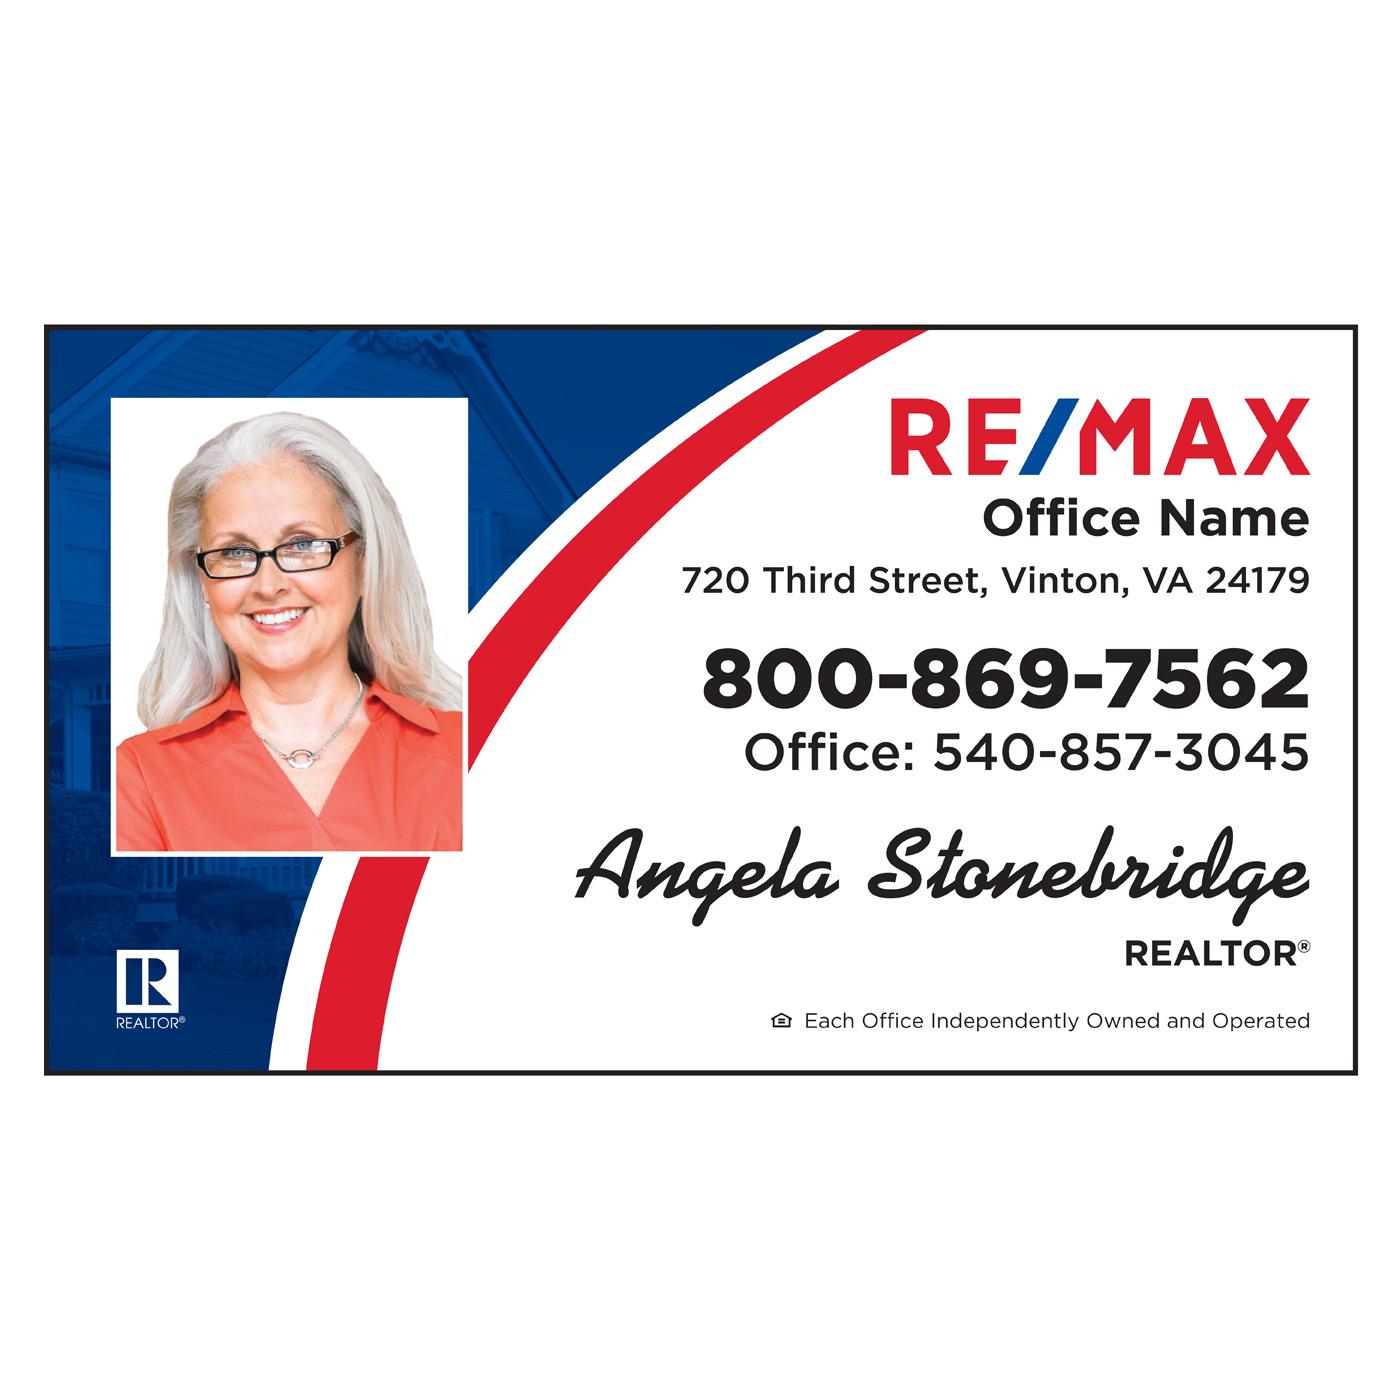 RE/MAX standard business card